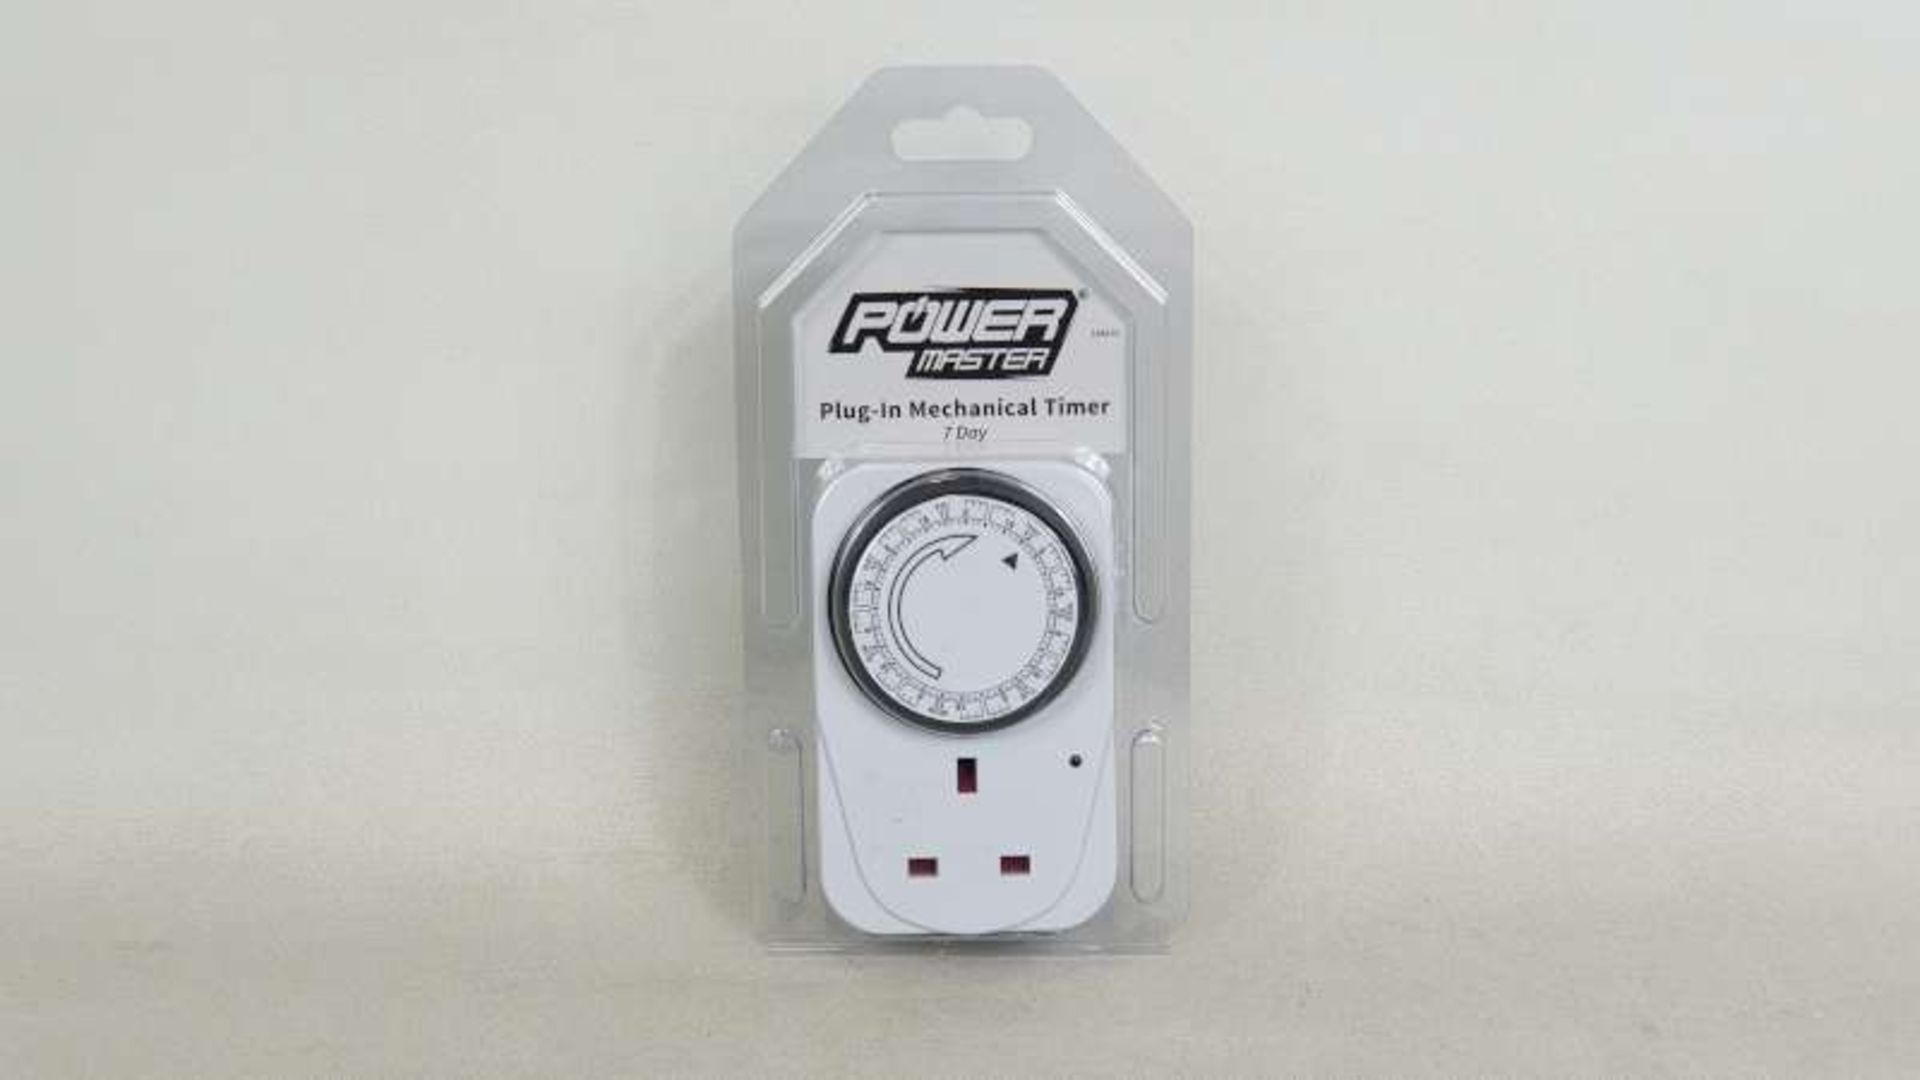 24 X POWER MASTER PLUG IN MECHANICAL 7 DAY TIMER